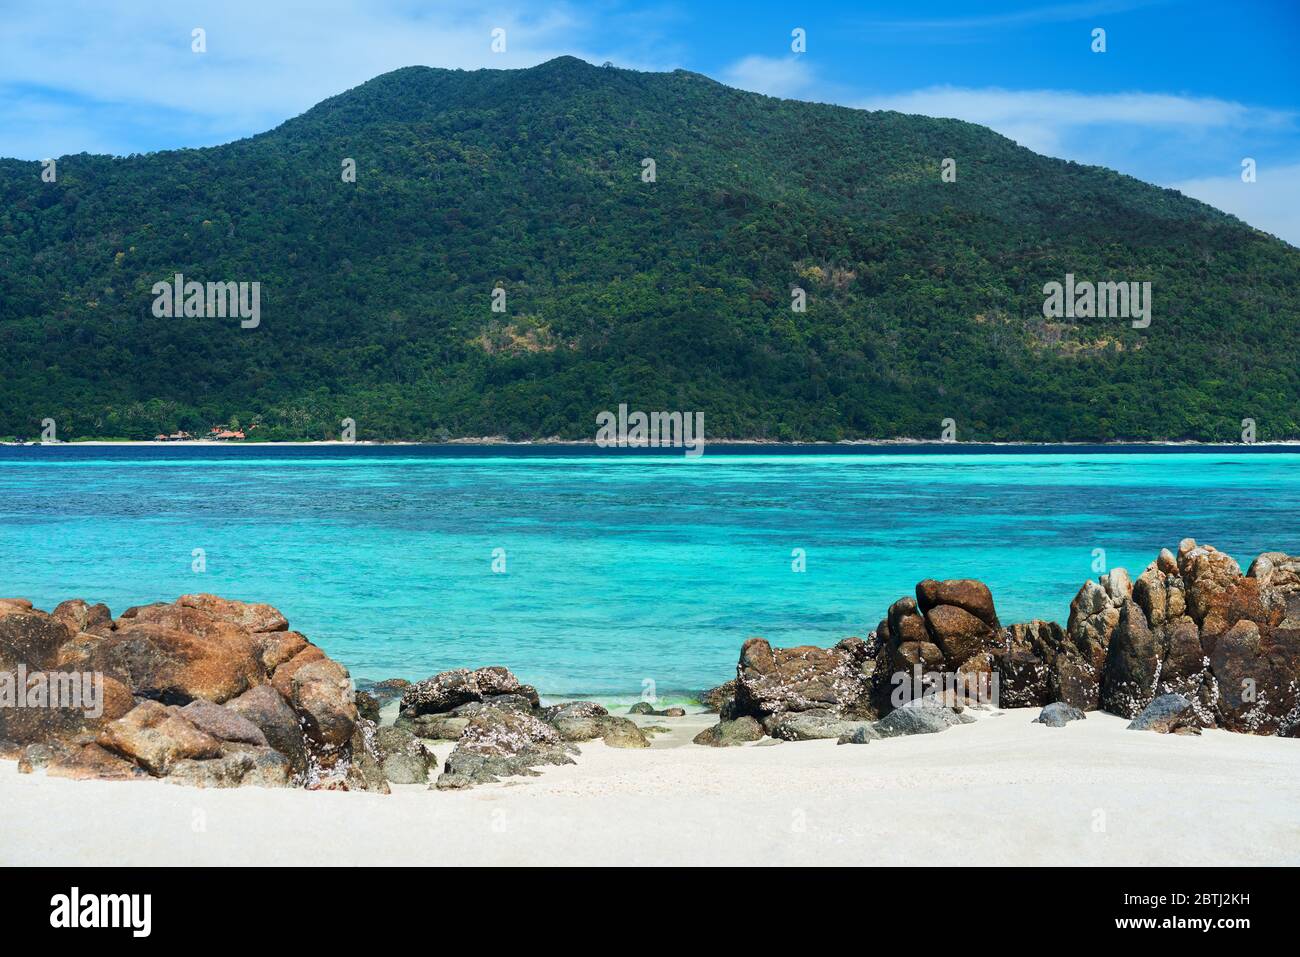 Turquoise clear sea and white sand beach on tropical island. Summer vacation, travel, nature background concept Stock Photo